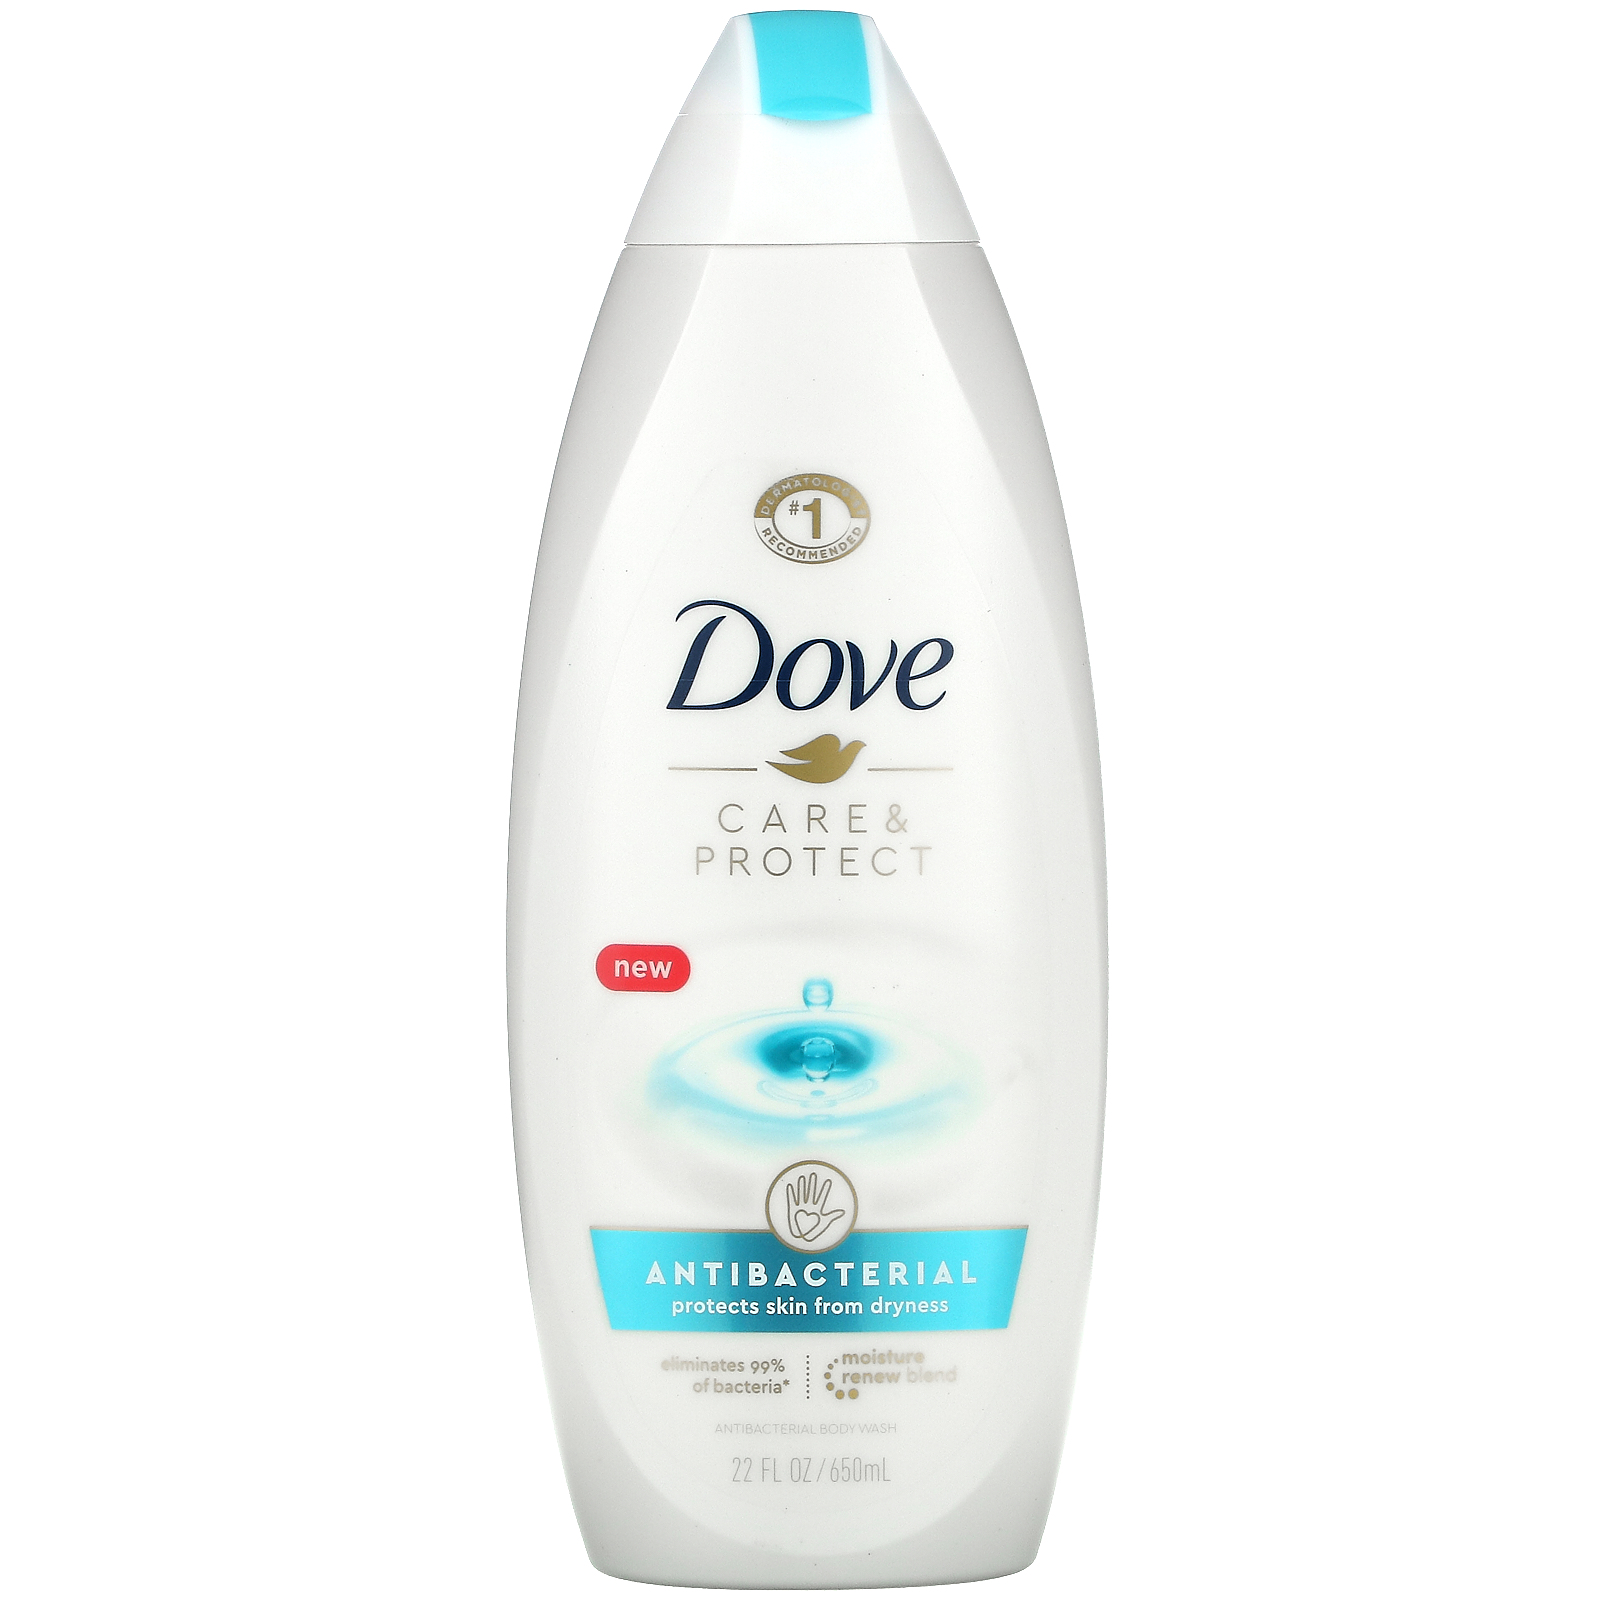 Dove Care And Protect Antibacterial Body Wash 22 Fl Oz 650 Ml Iherb